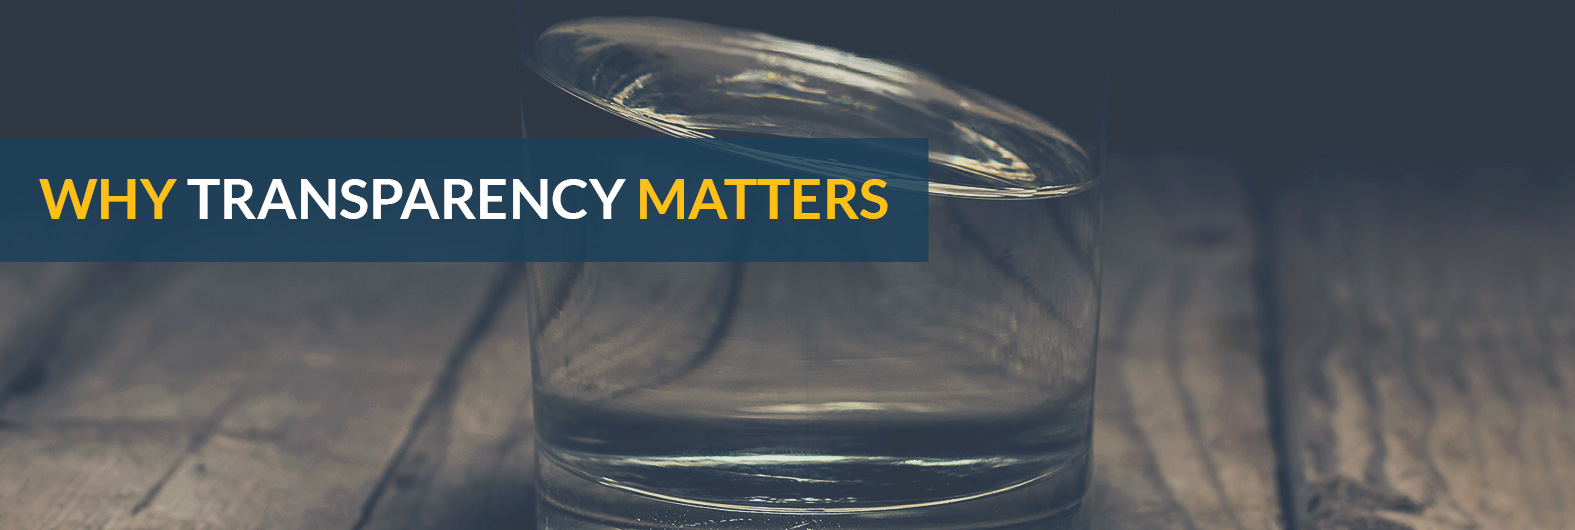 Why Transparency Matters